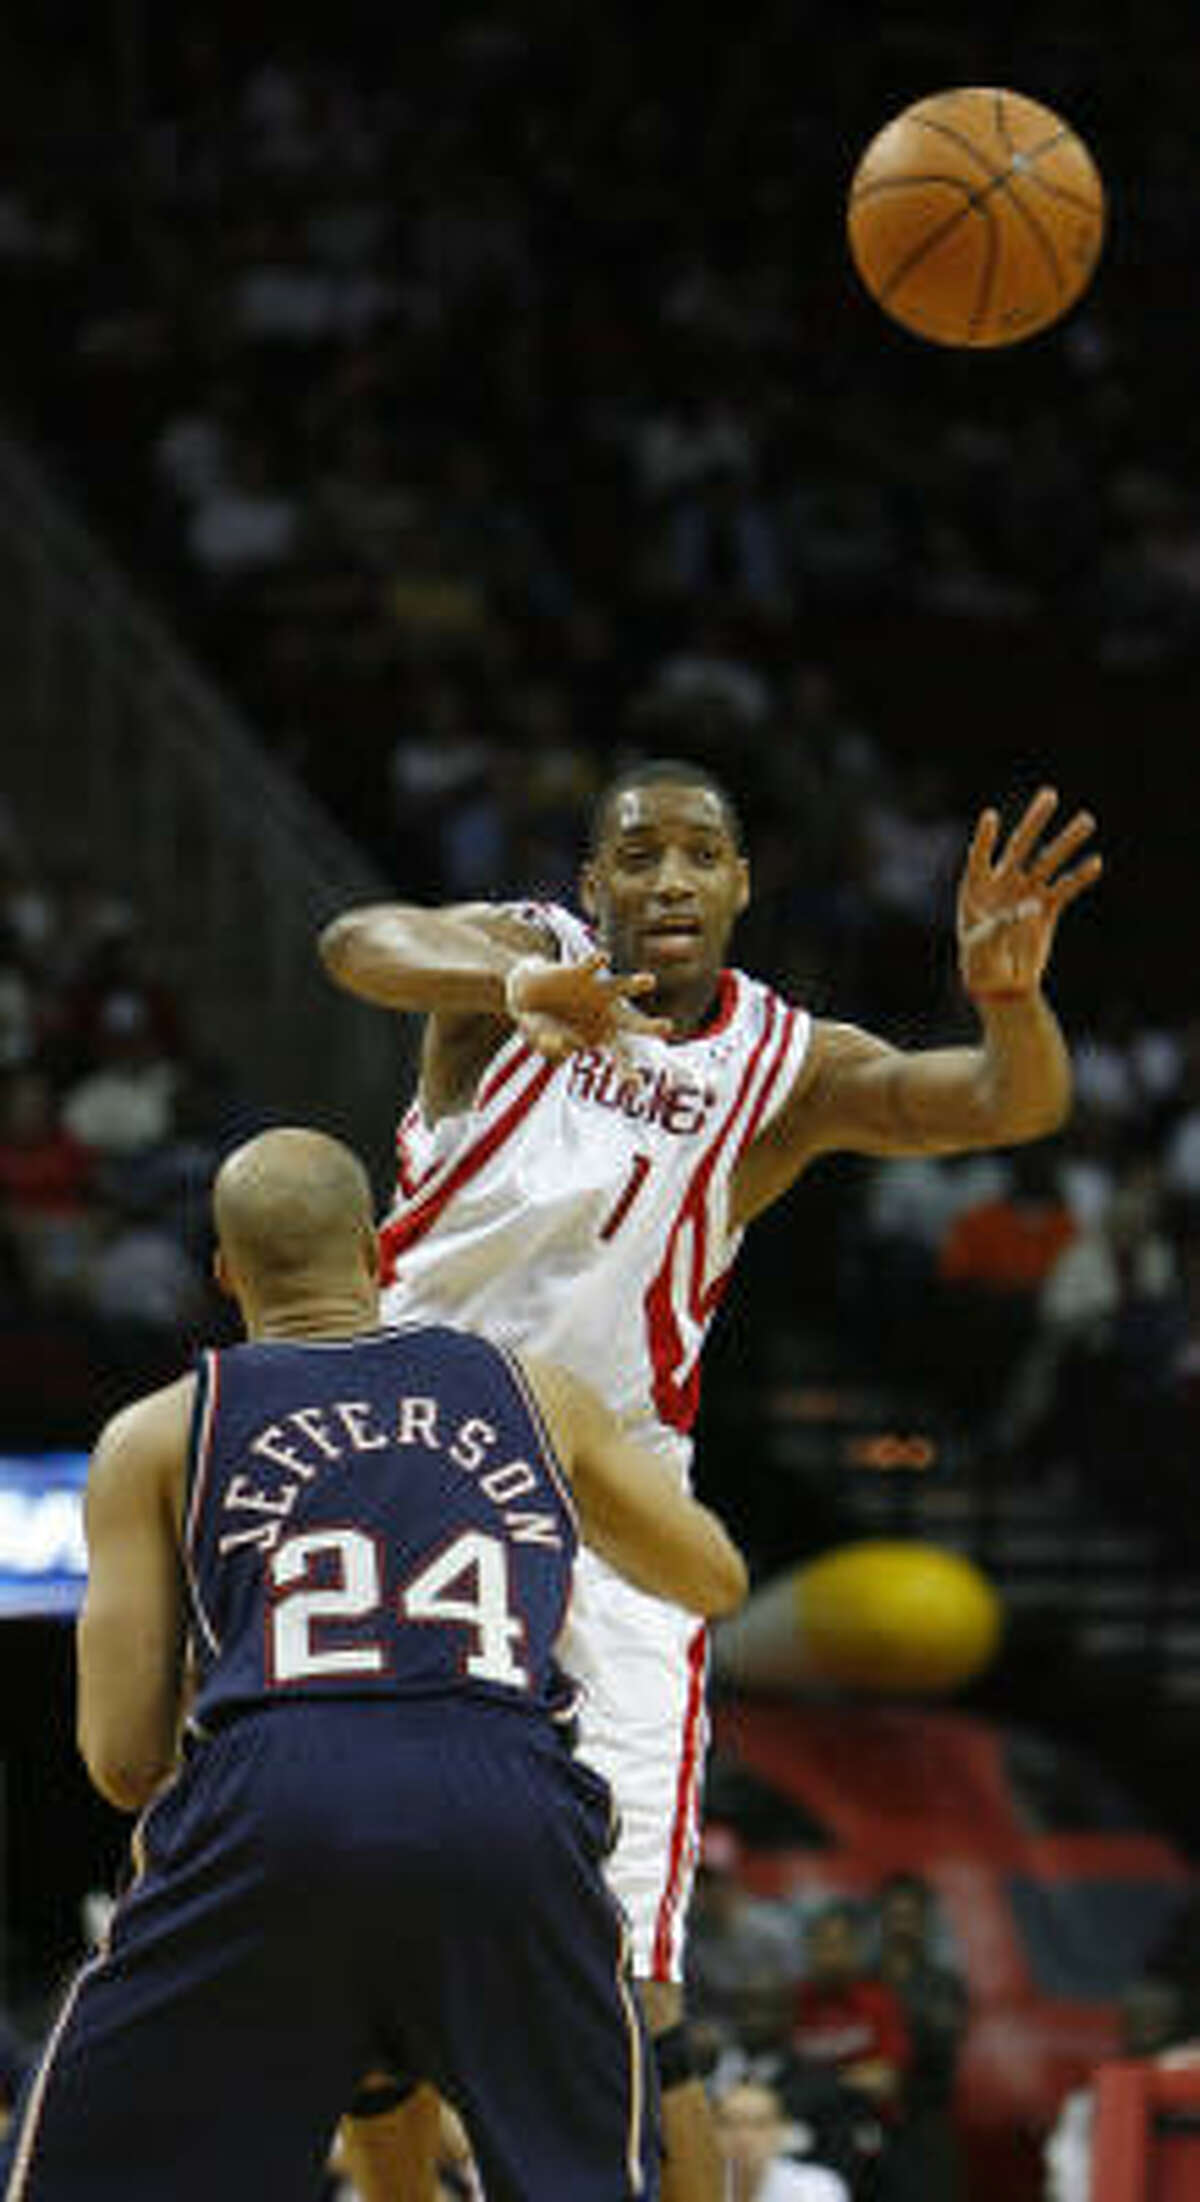 Tracy McGrady's 34 points helped the Rockets get a win over Richard Jefferson and the New Jersey Nets.